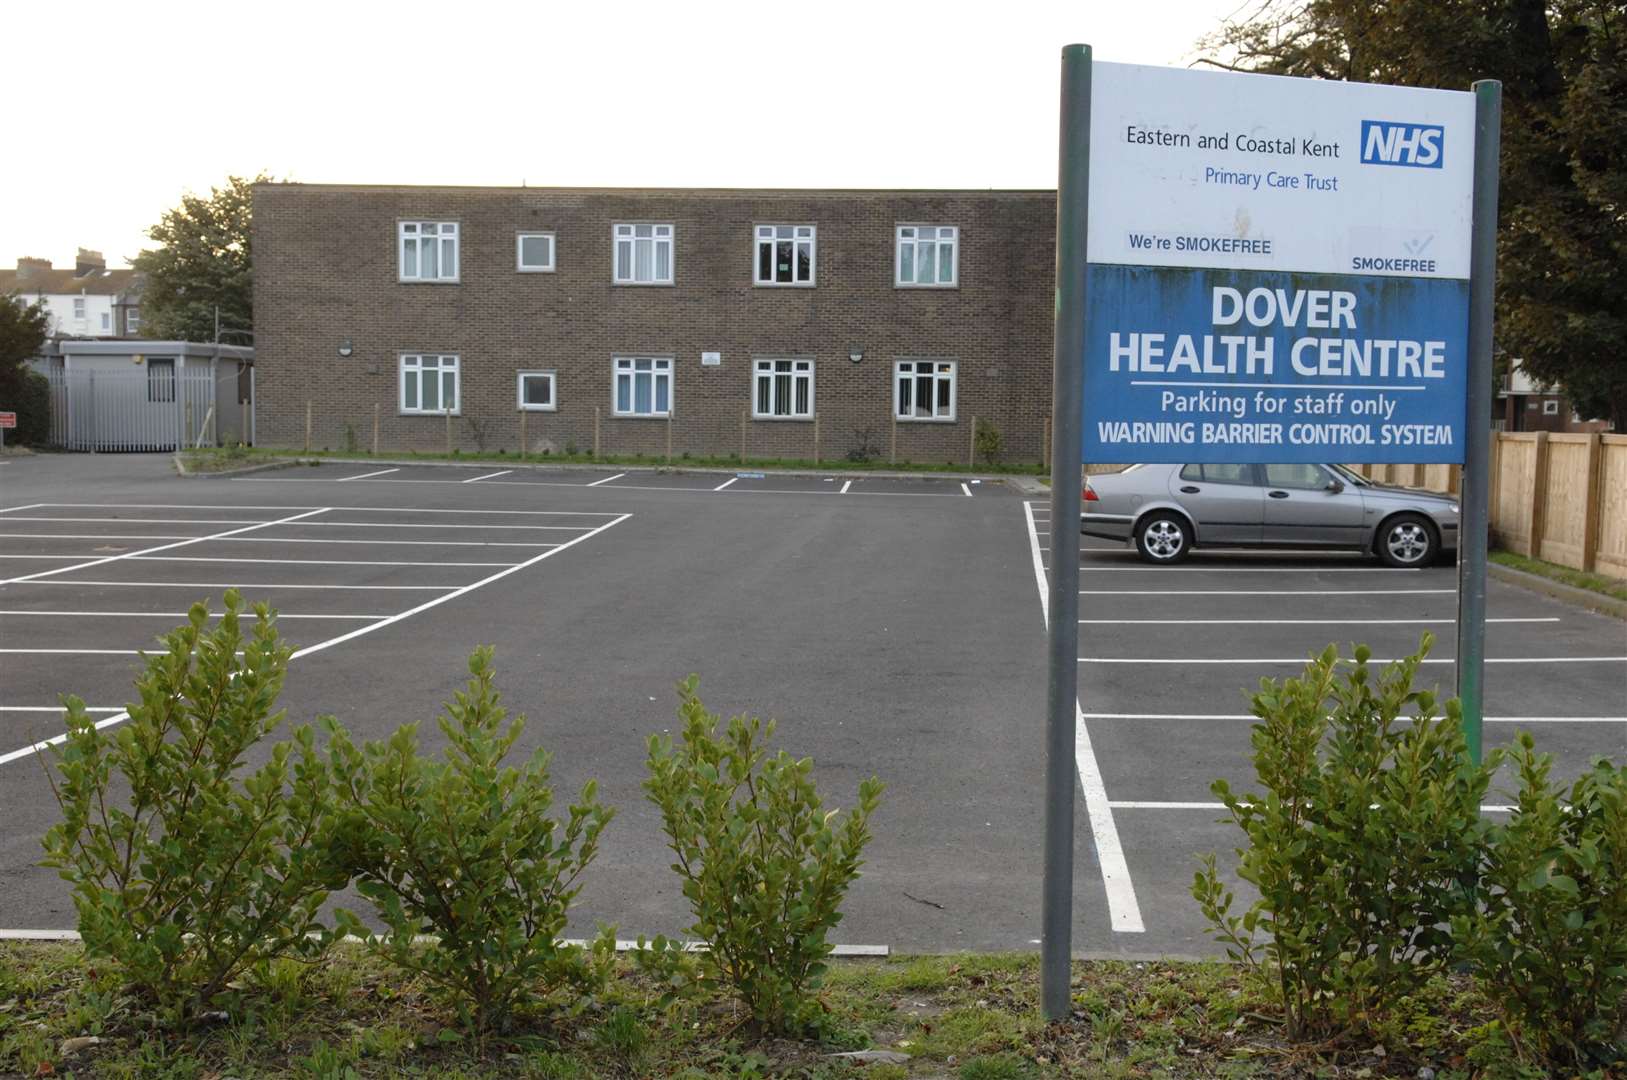 Dover Health Centre: one of only two local vaccine sites Picture:Chris Davey